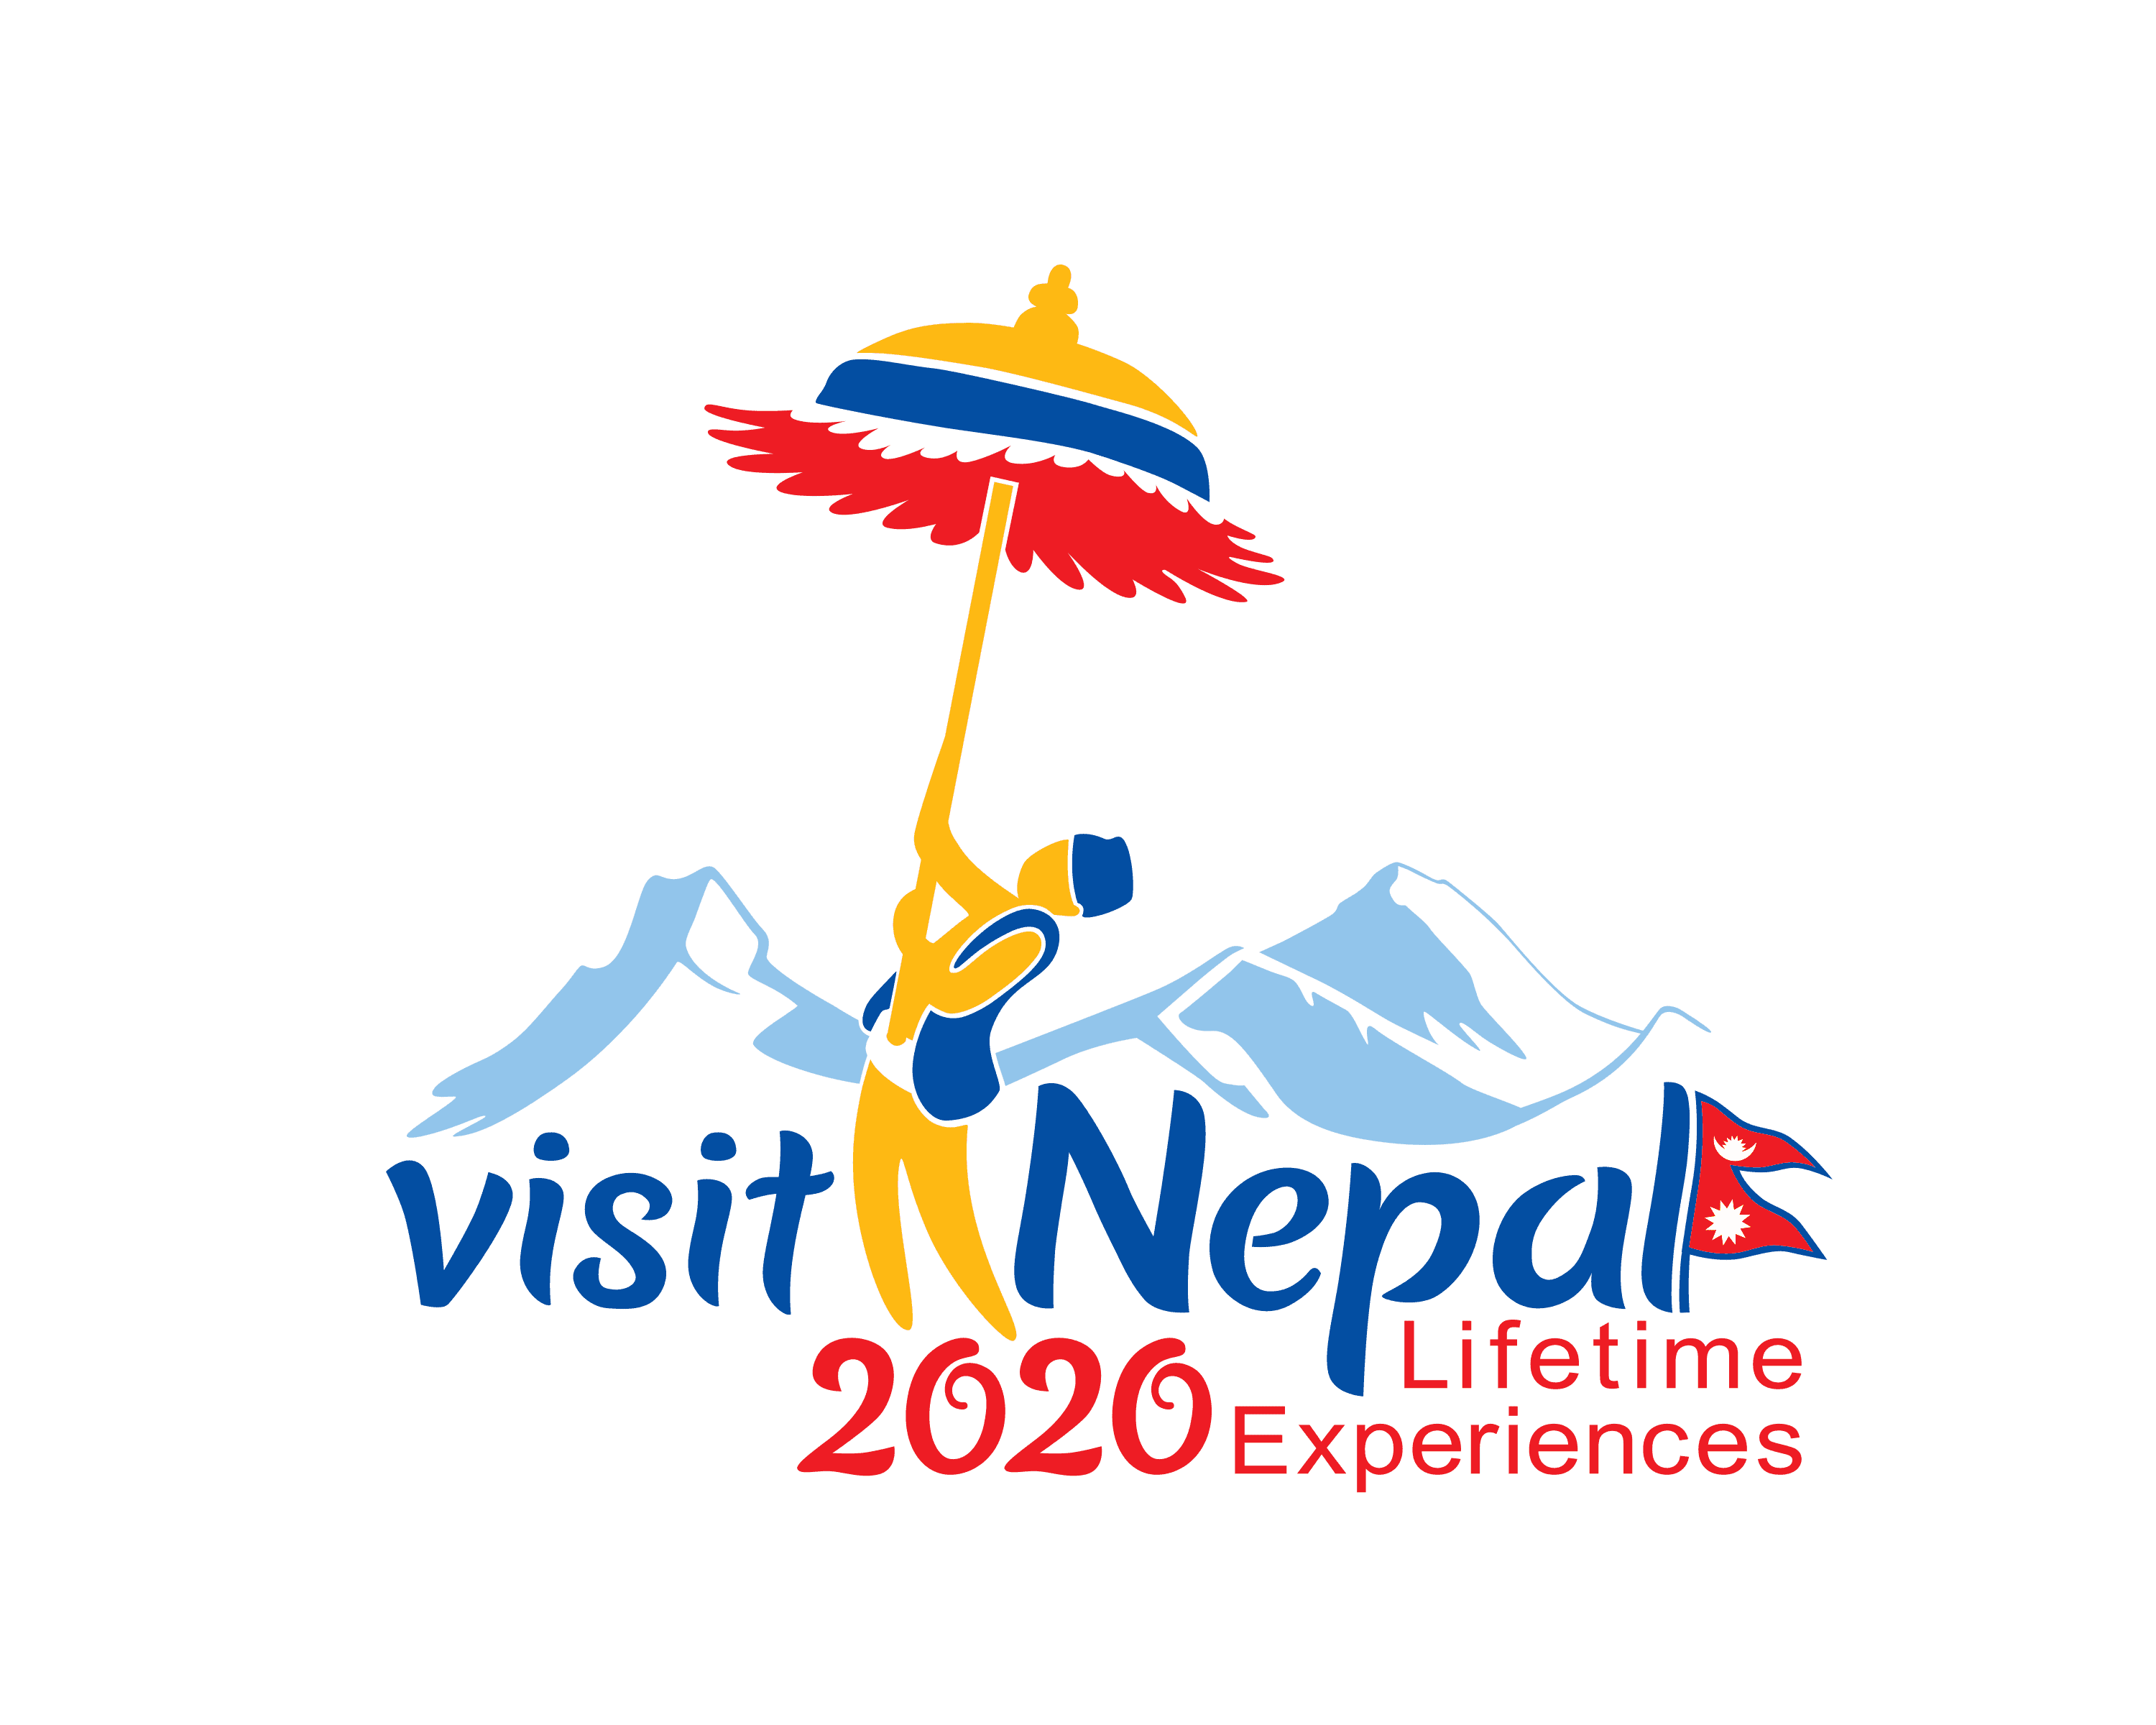 How can you contribute to visit Nepal 2020 campaign as a traveler? #visitNepal2020! Be a part of it!